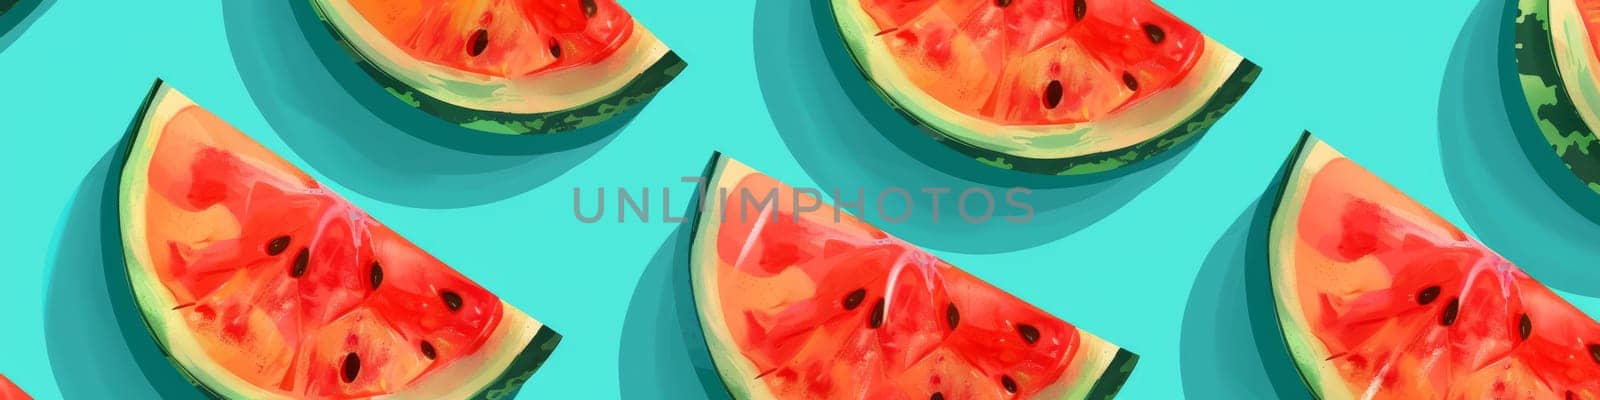 Top view to slices of a red melon isolated on bright teal background, fruit food concept